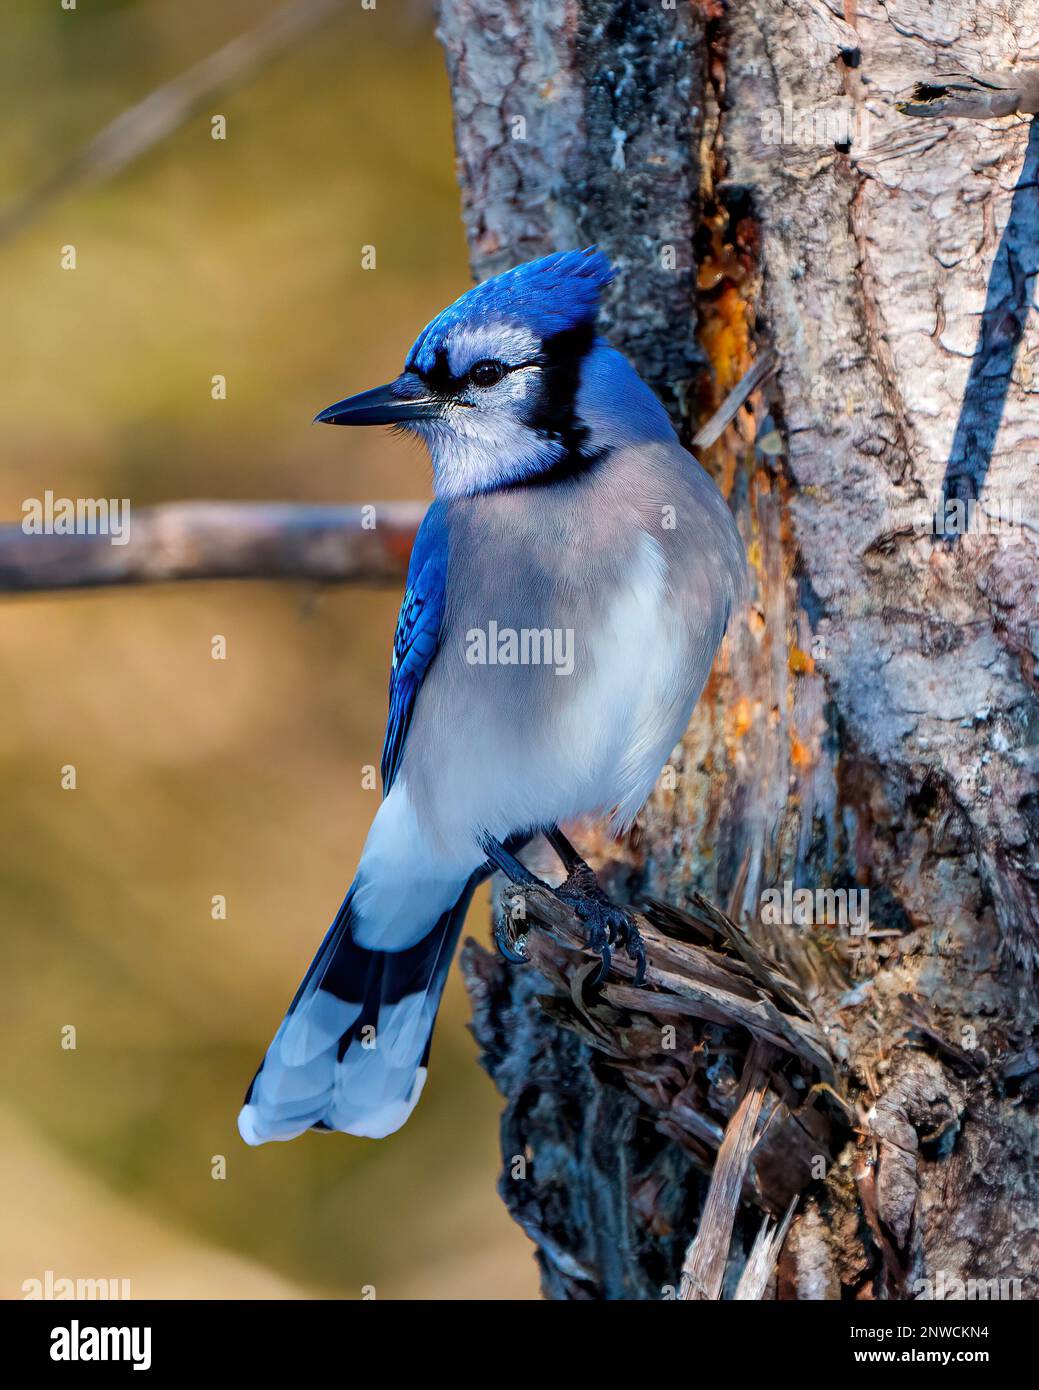 Blue Jay close up front view perched on a tree branch with blur forest background in its environment and habitat surrounding. Jay picture. Stock Photo